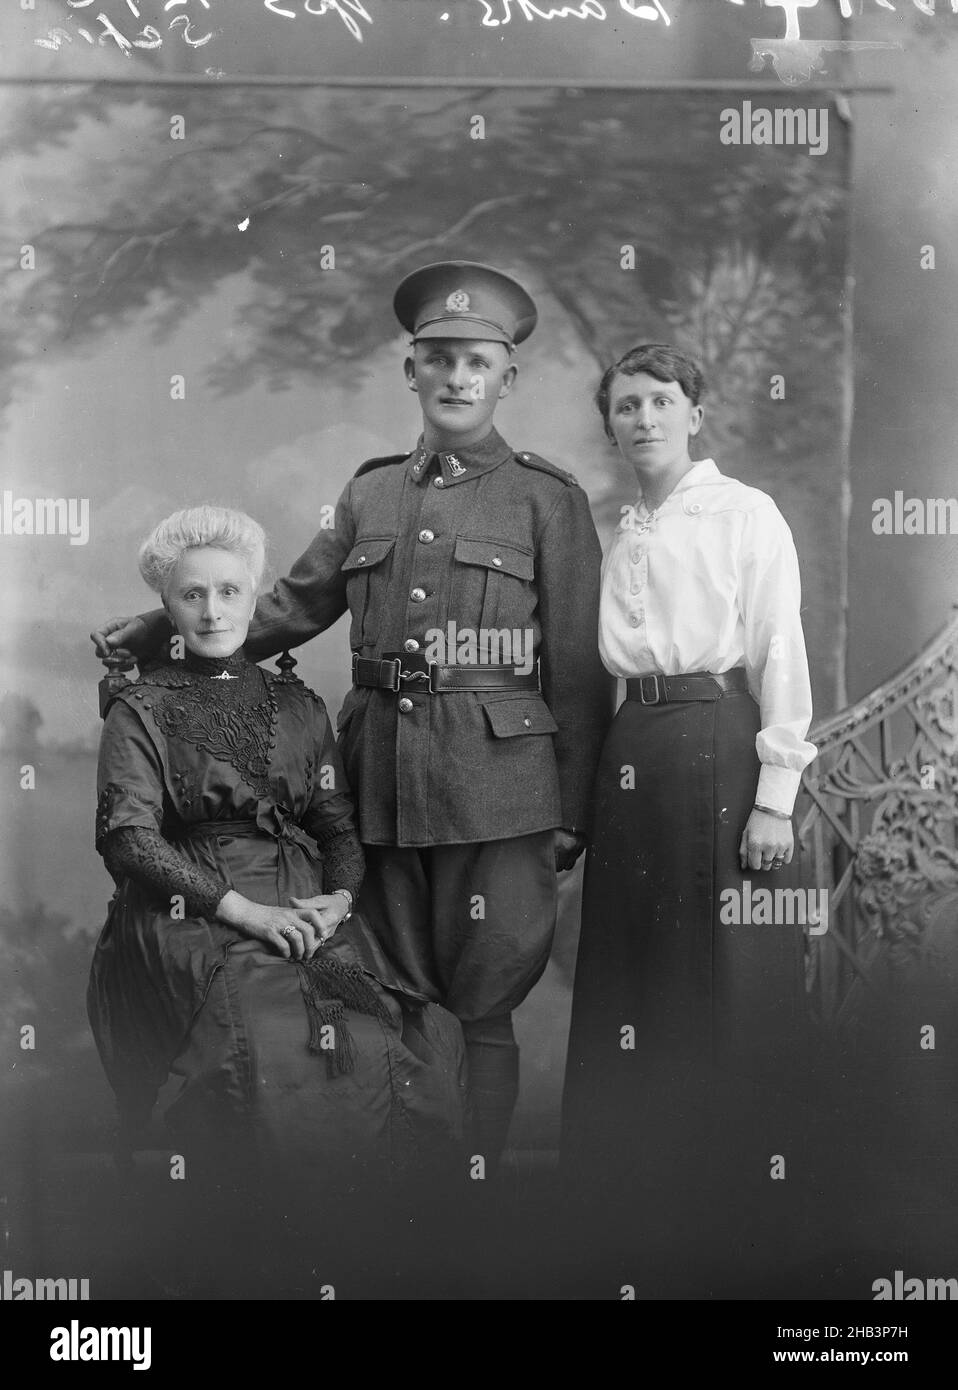 Portrait of an unidentified soldier and two unidentified women [inscribed Banks], Berry & Co, photography studio, 1916- 1917, Wellington, Portrait of a New Zealand soldier in the uniform of a Rifleman  in the Rifle Brigade, standing between two women, one seated and one standing. The older woman may be his mother, the younger may be a sister. Of the five New Zealand soldiers with the surname 'Banks' who served in the Rifle Brigade during WW1 Stock Photo